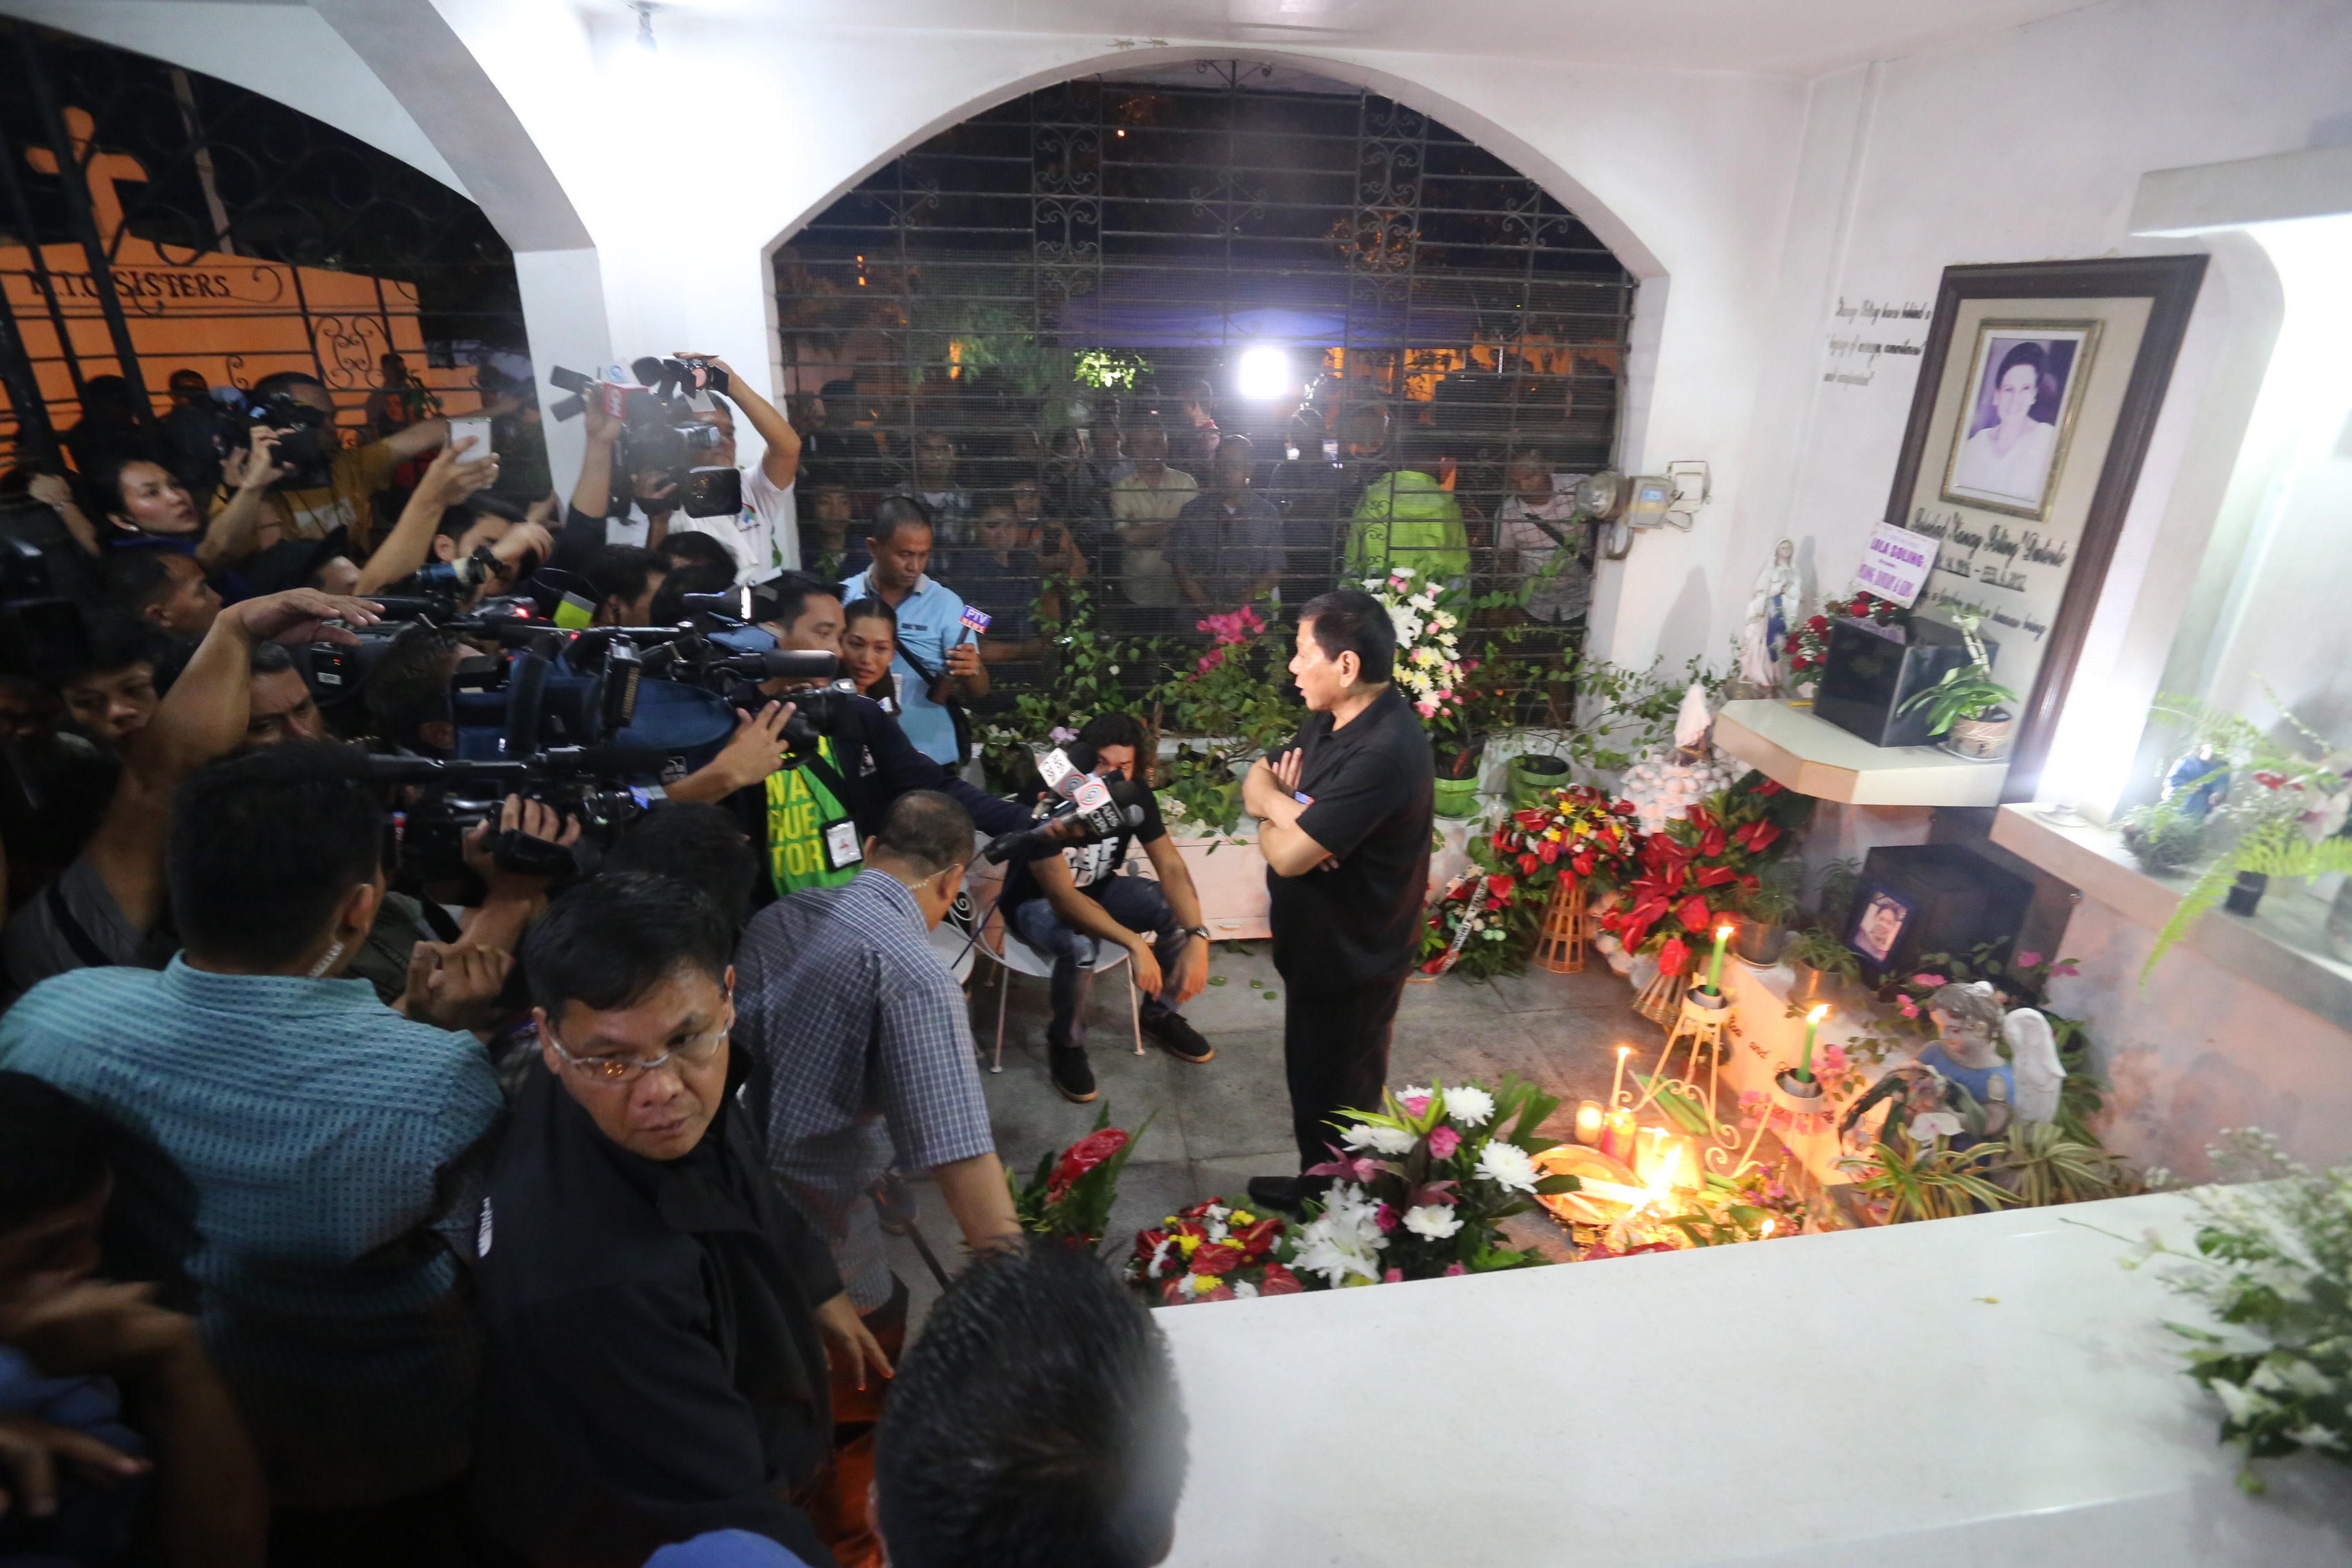 MEDIA CONFERENCE. President Rodrigo Duterte answers media questions after visiting the grave of his parents in Davao City on November 1, 2016. Photo by Manman Dejeto/Rappler 